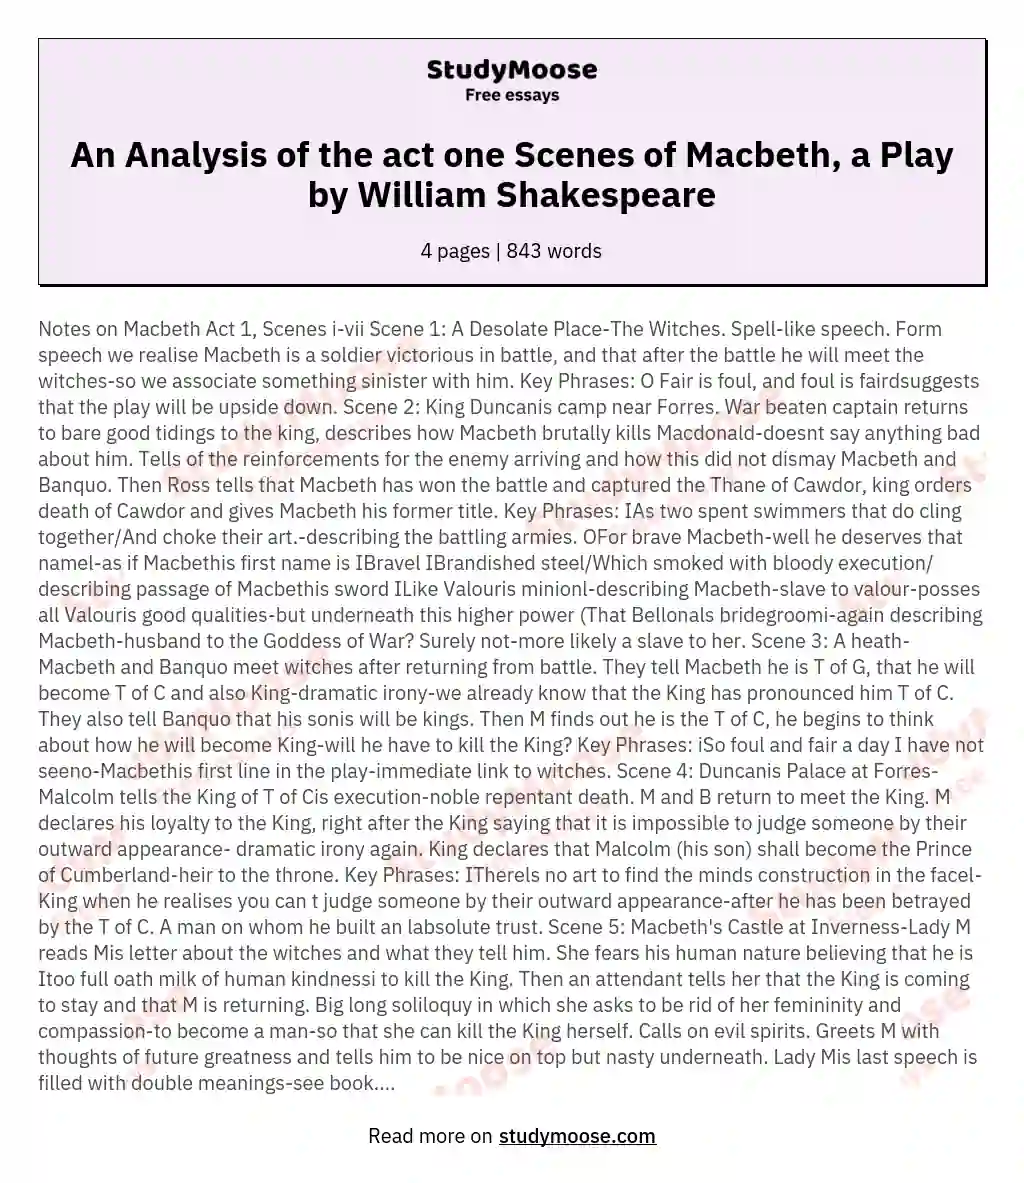 An Analysis of the act one Scenes of Macbeth, a Play by William Shakespeare essay